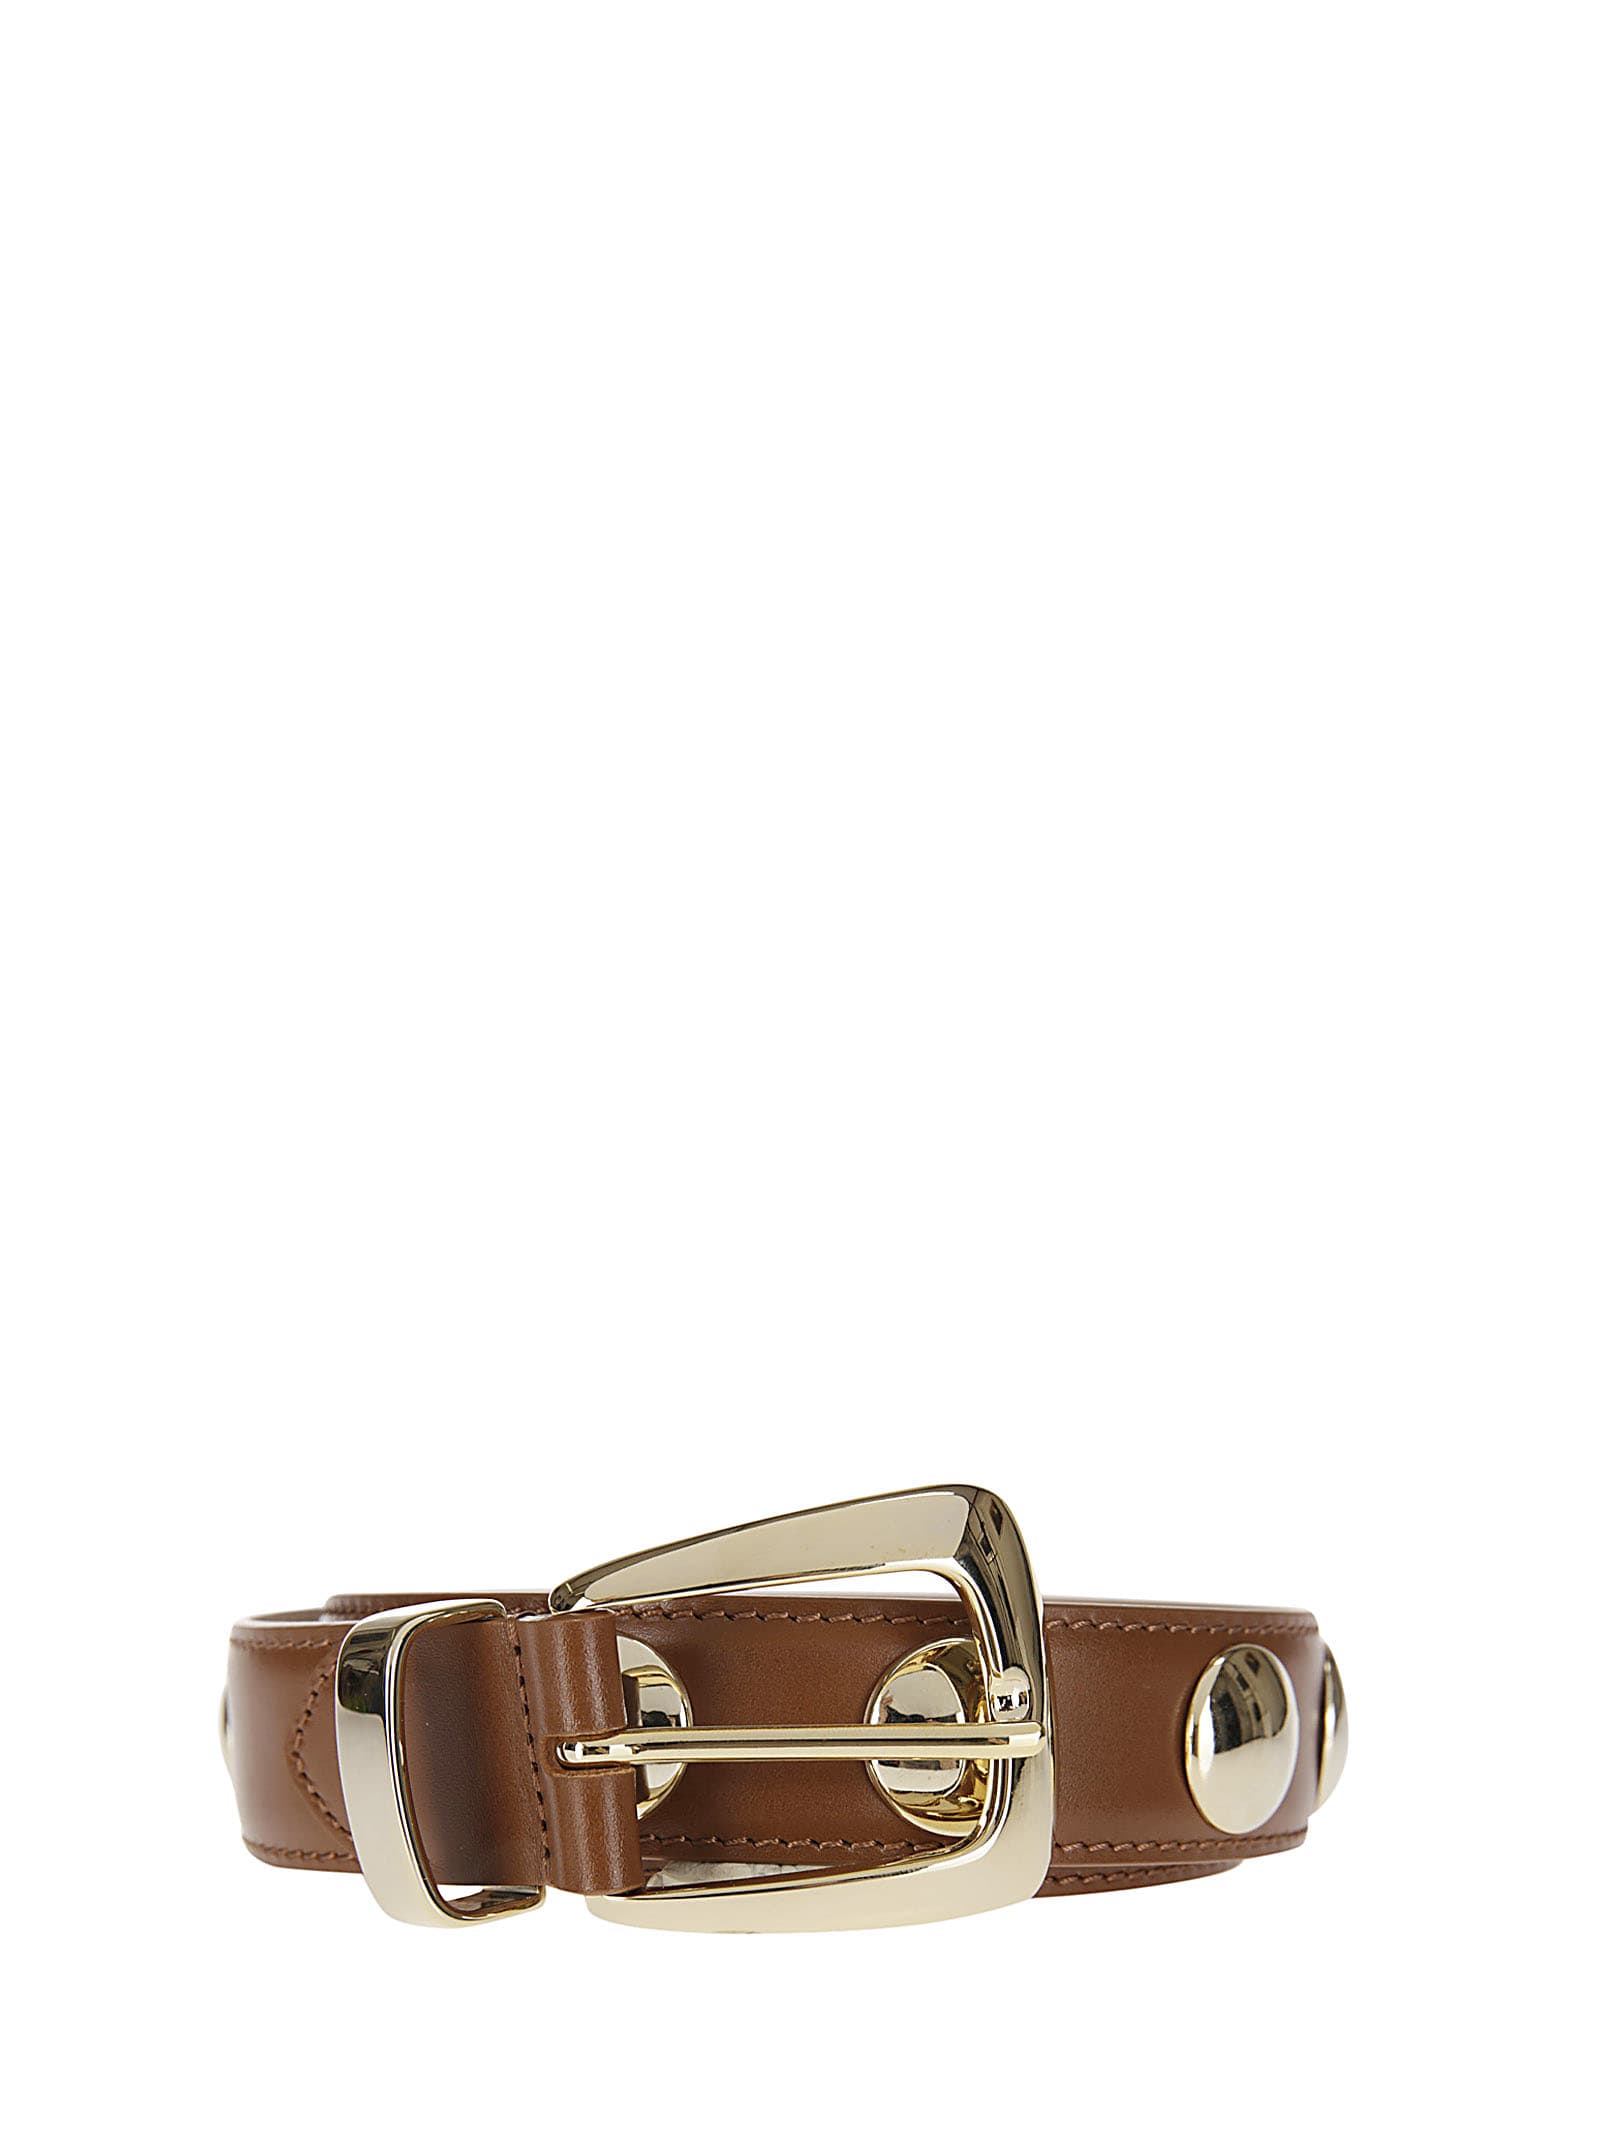 Benny Belt With Studs - Gold Buckle (30mm)